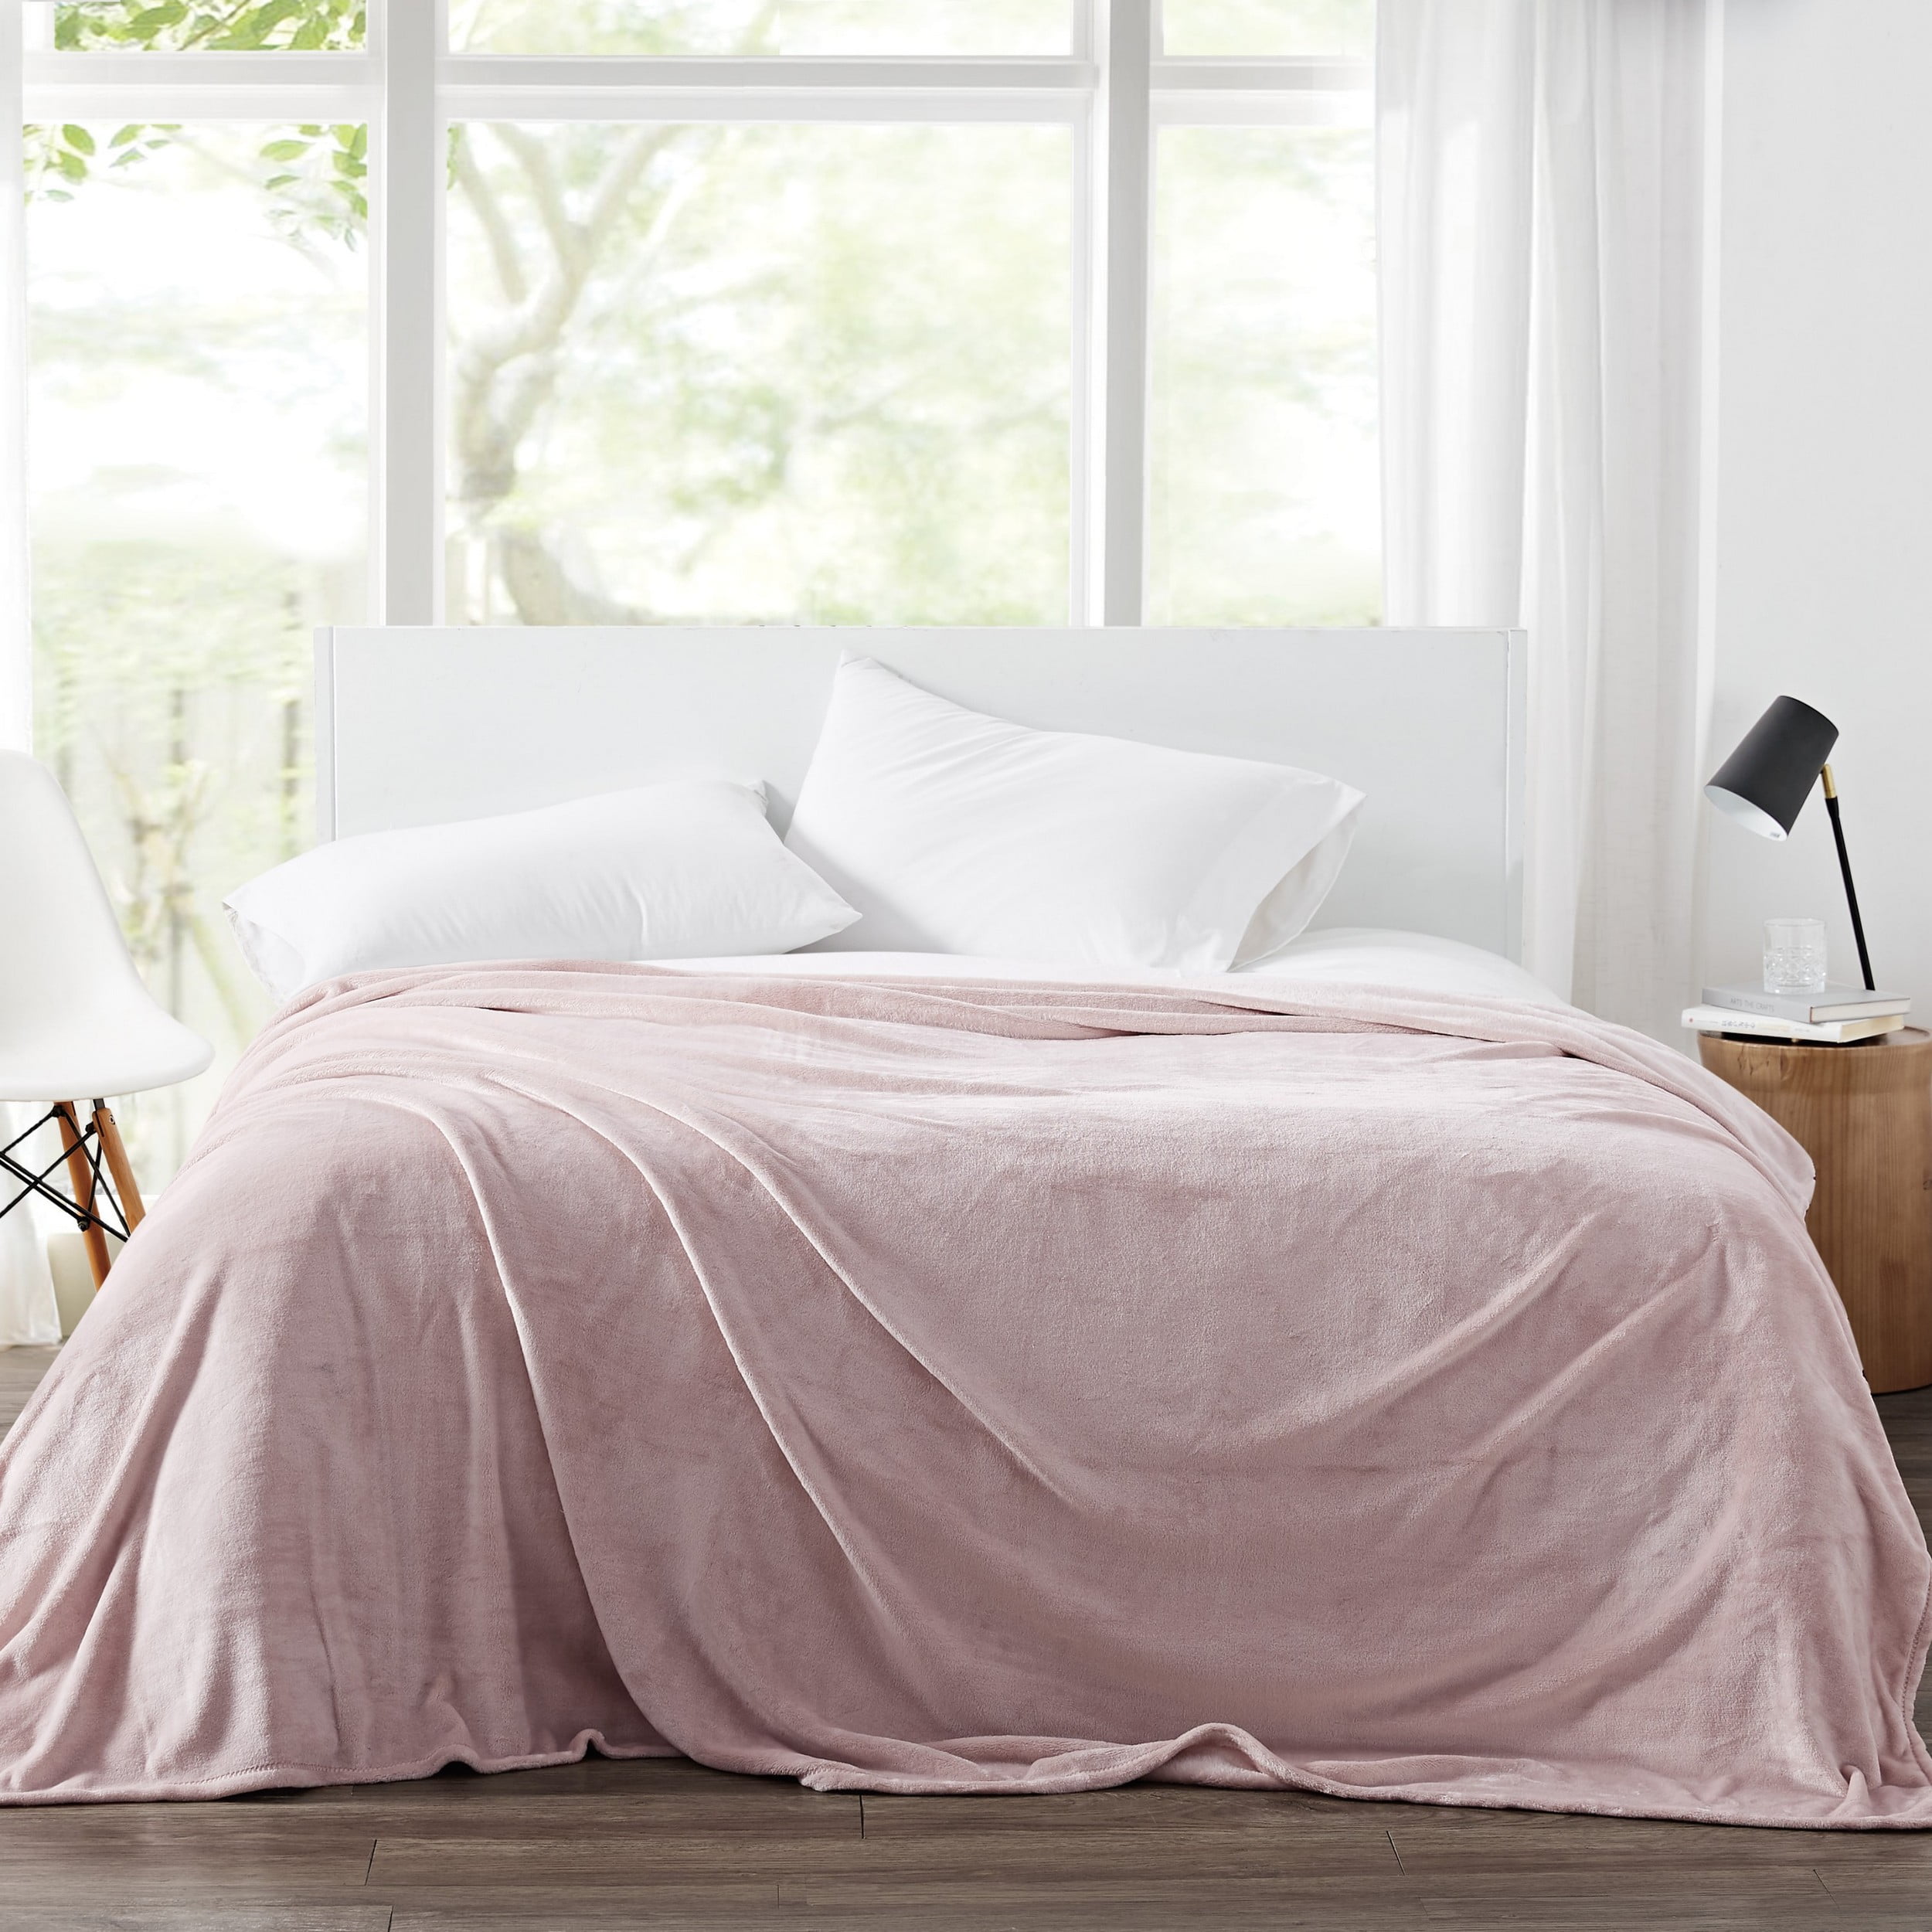 Cannon Solid Plush Blush Twin Xl, Twin Xl Blankets For Bed